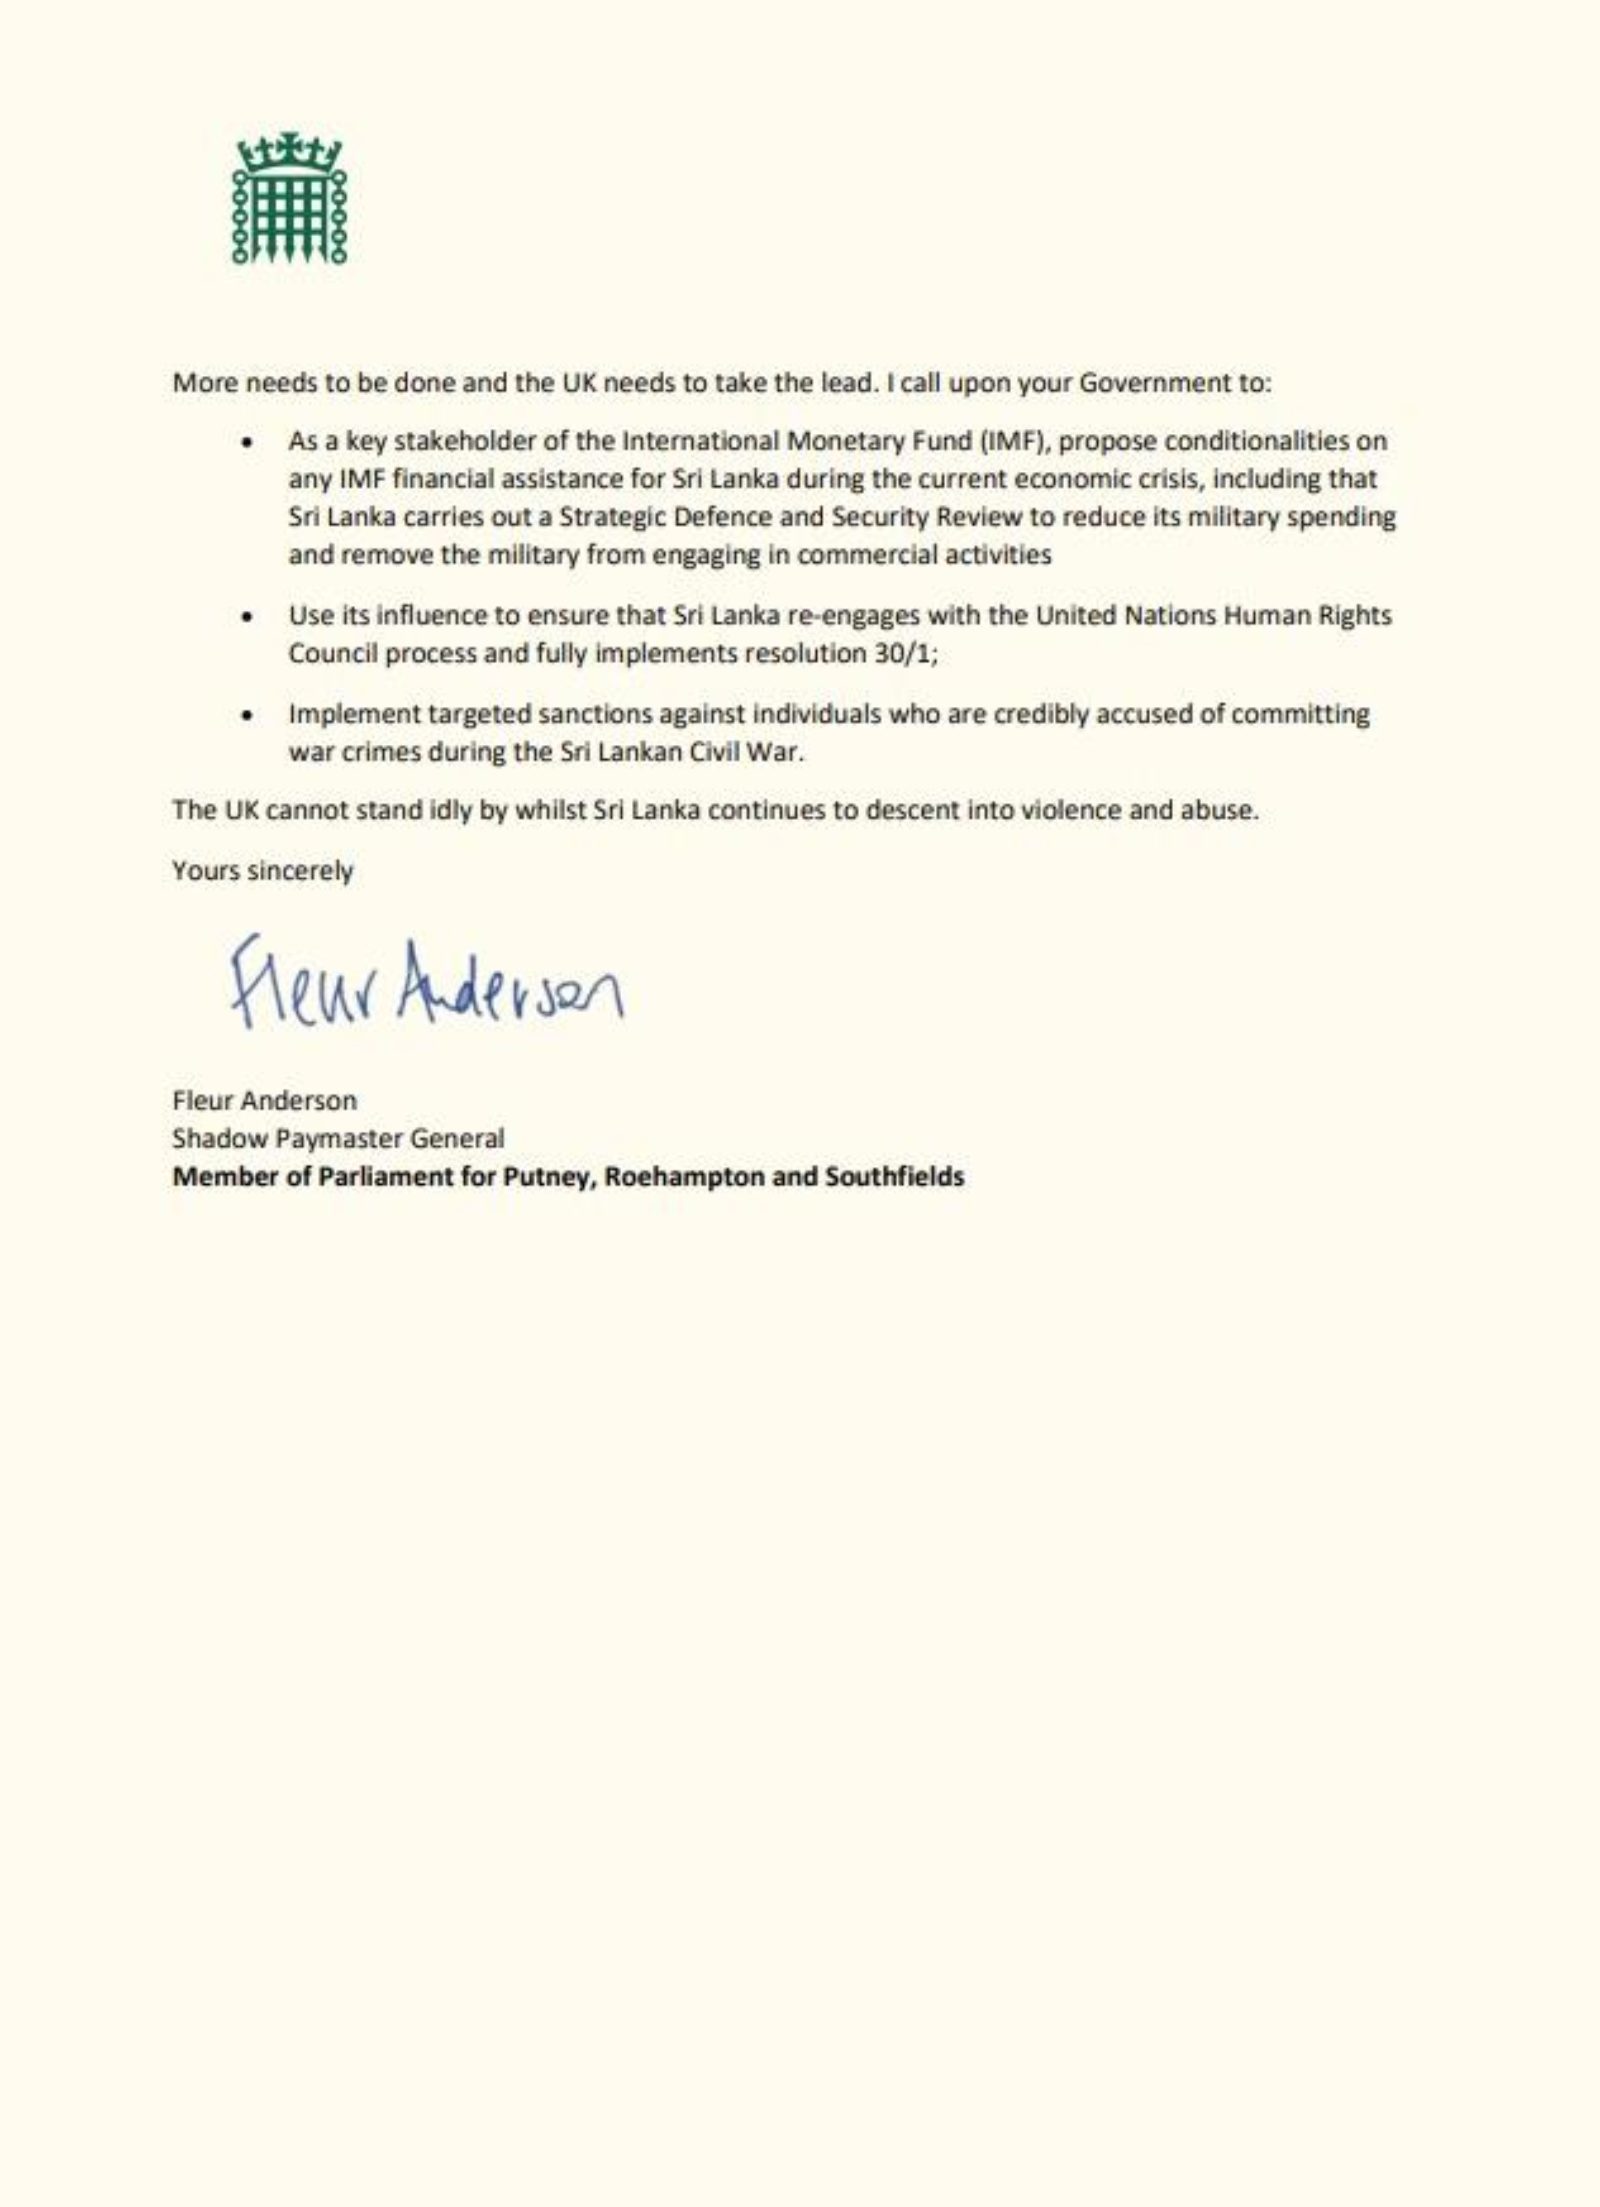 Letter from Fleur Anderson MP regarding situation in Sri Lanka p.2